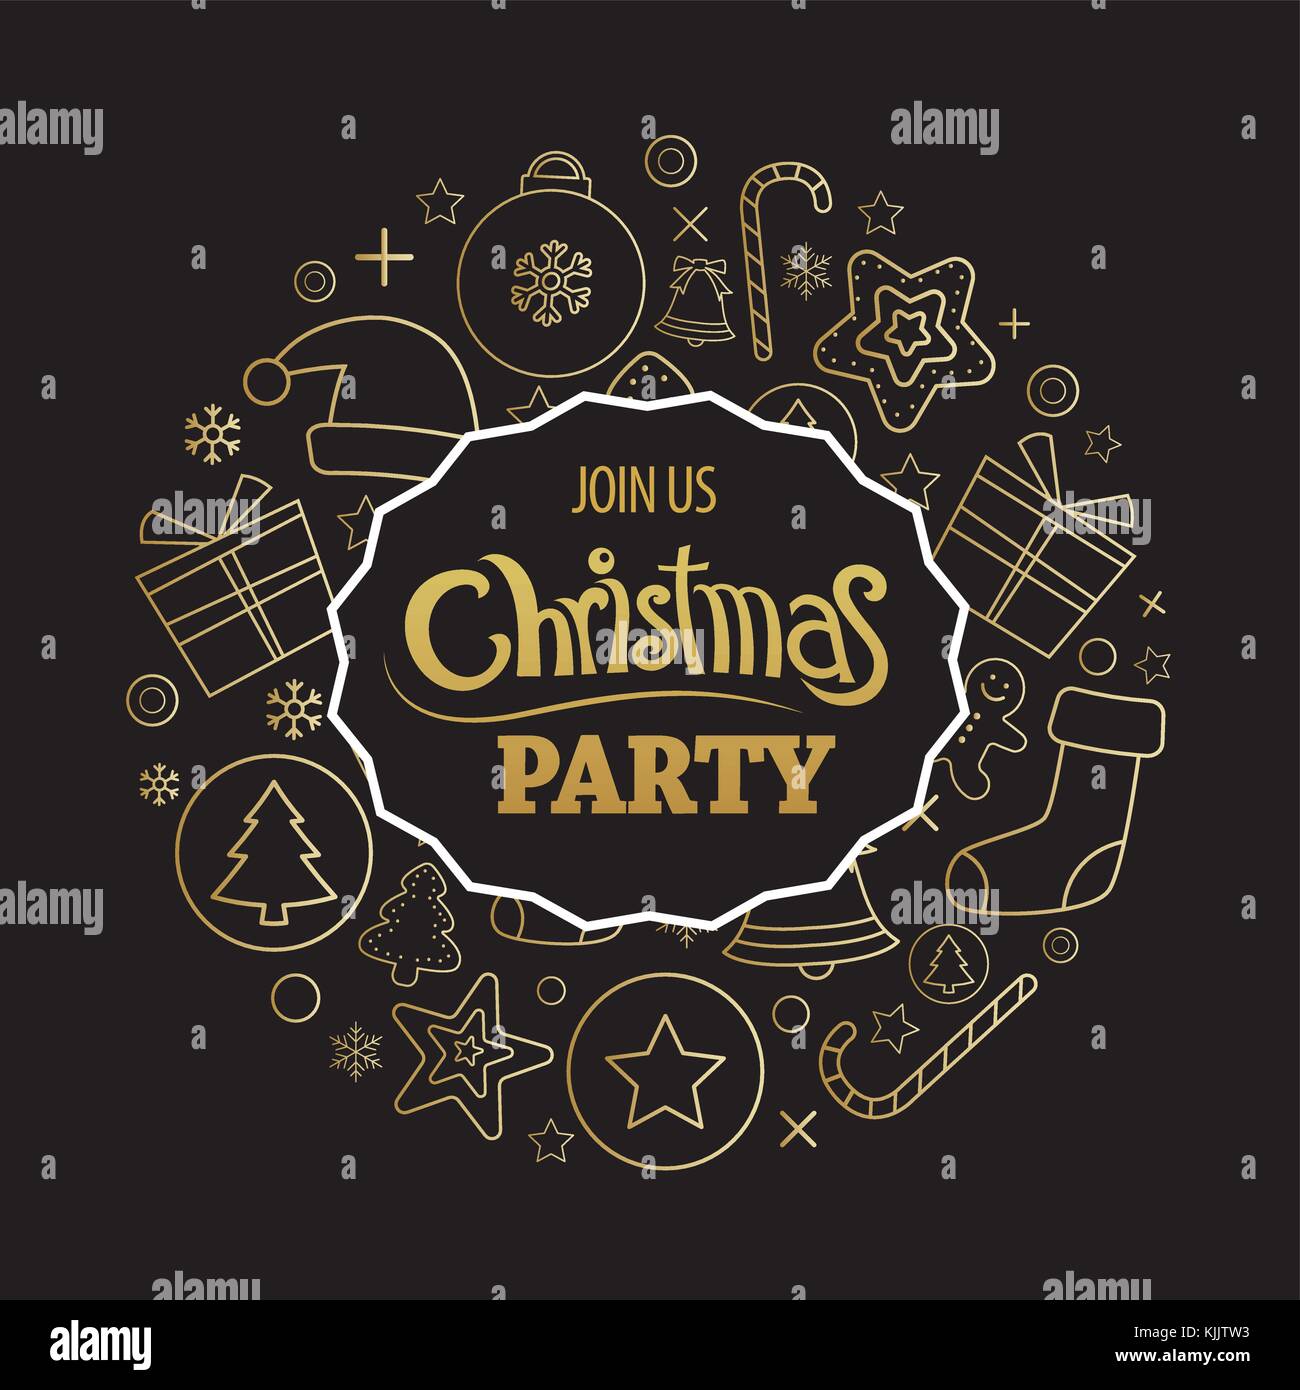 Merry christmas party invitations and  greeting card on black background. Vector illustration element for happy new year design. Stock Vector